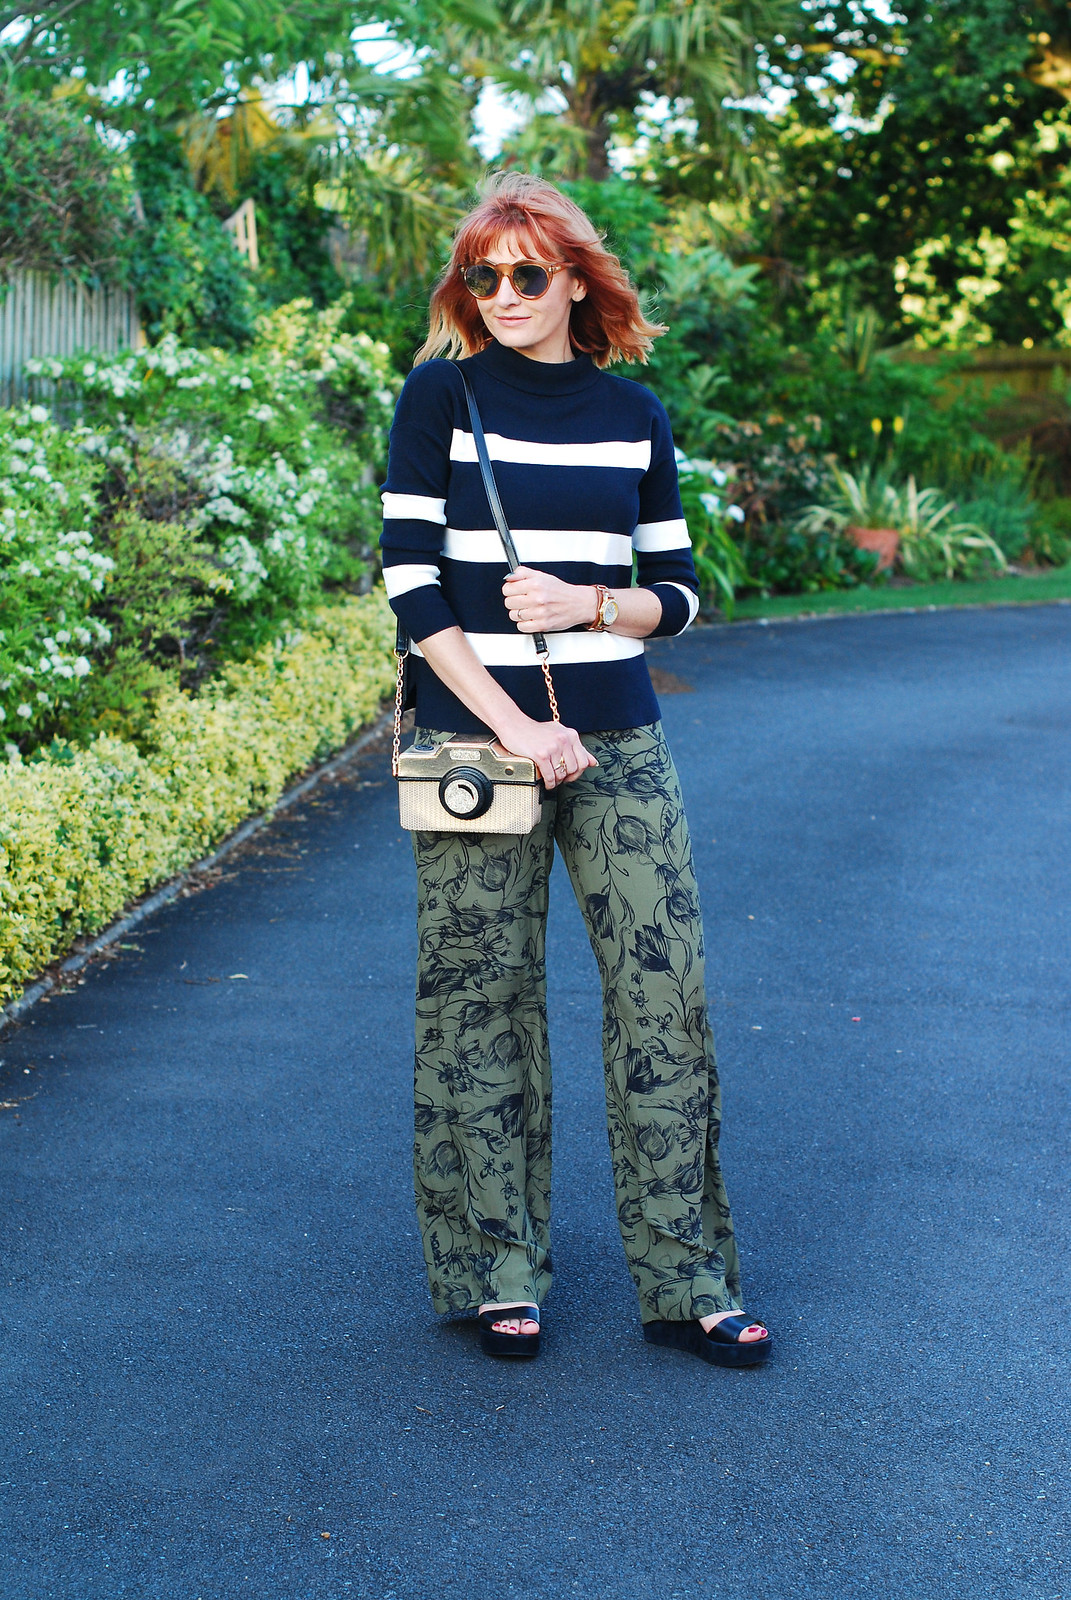 Pattern mixing: Navy/white striped sweater, khaki floral wide leg pants, strappy wedge sandals, novelty camera bag - Hobbs SS16 | Not Dressed As Lamb